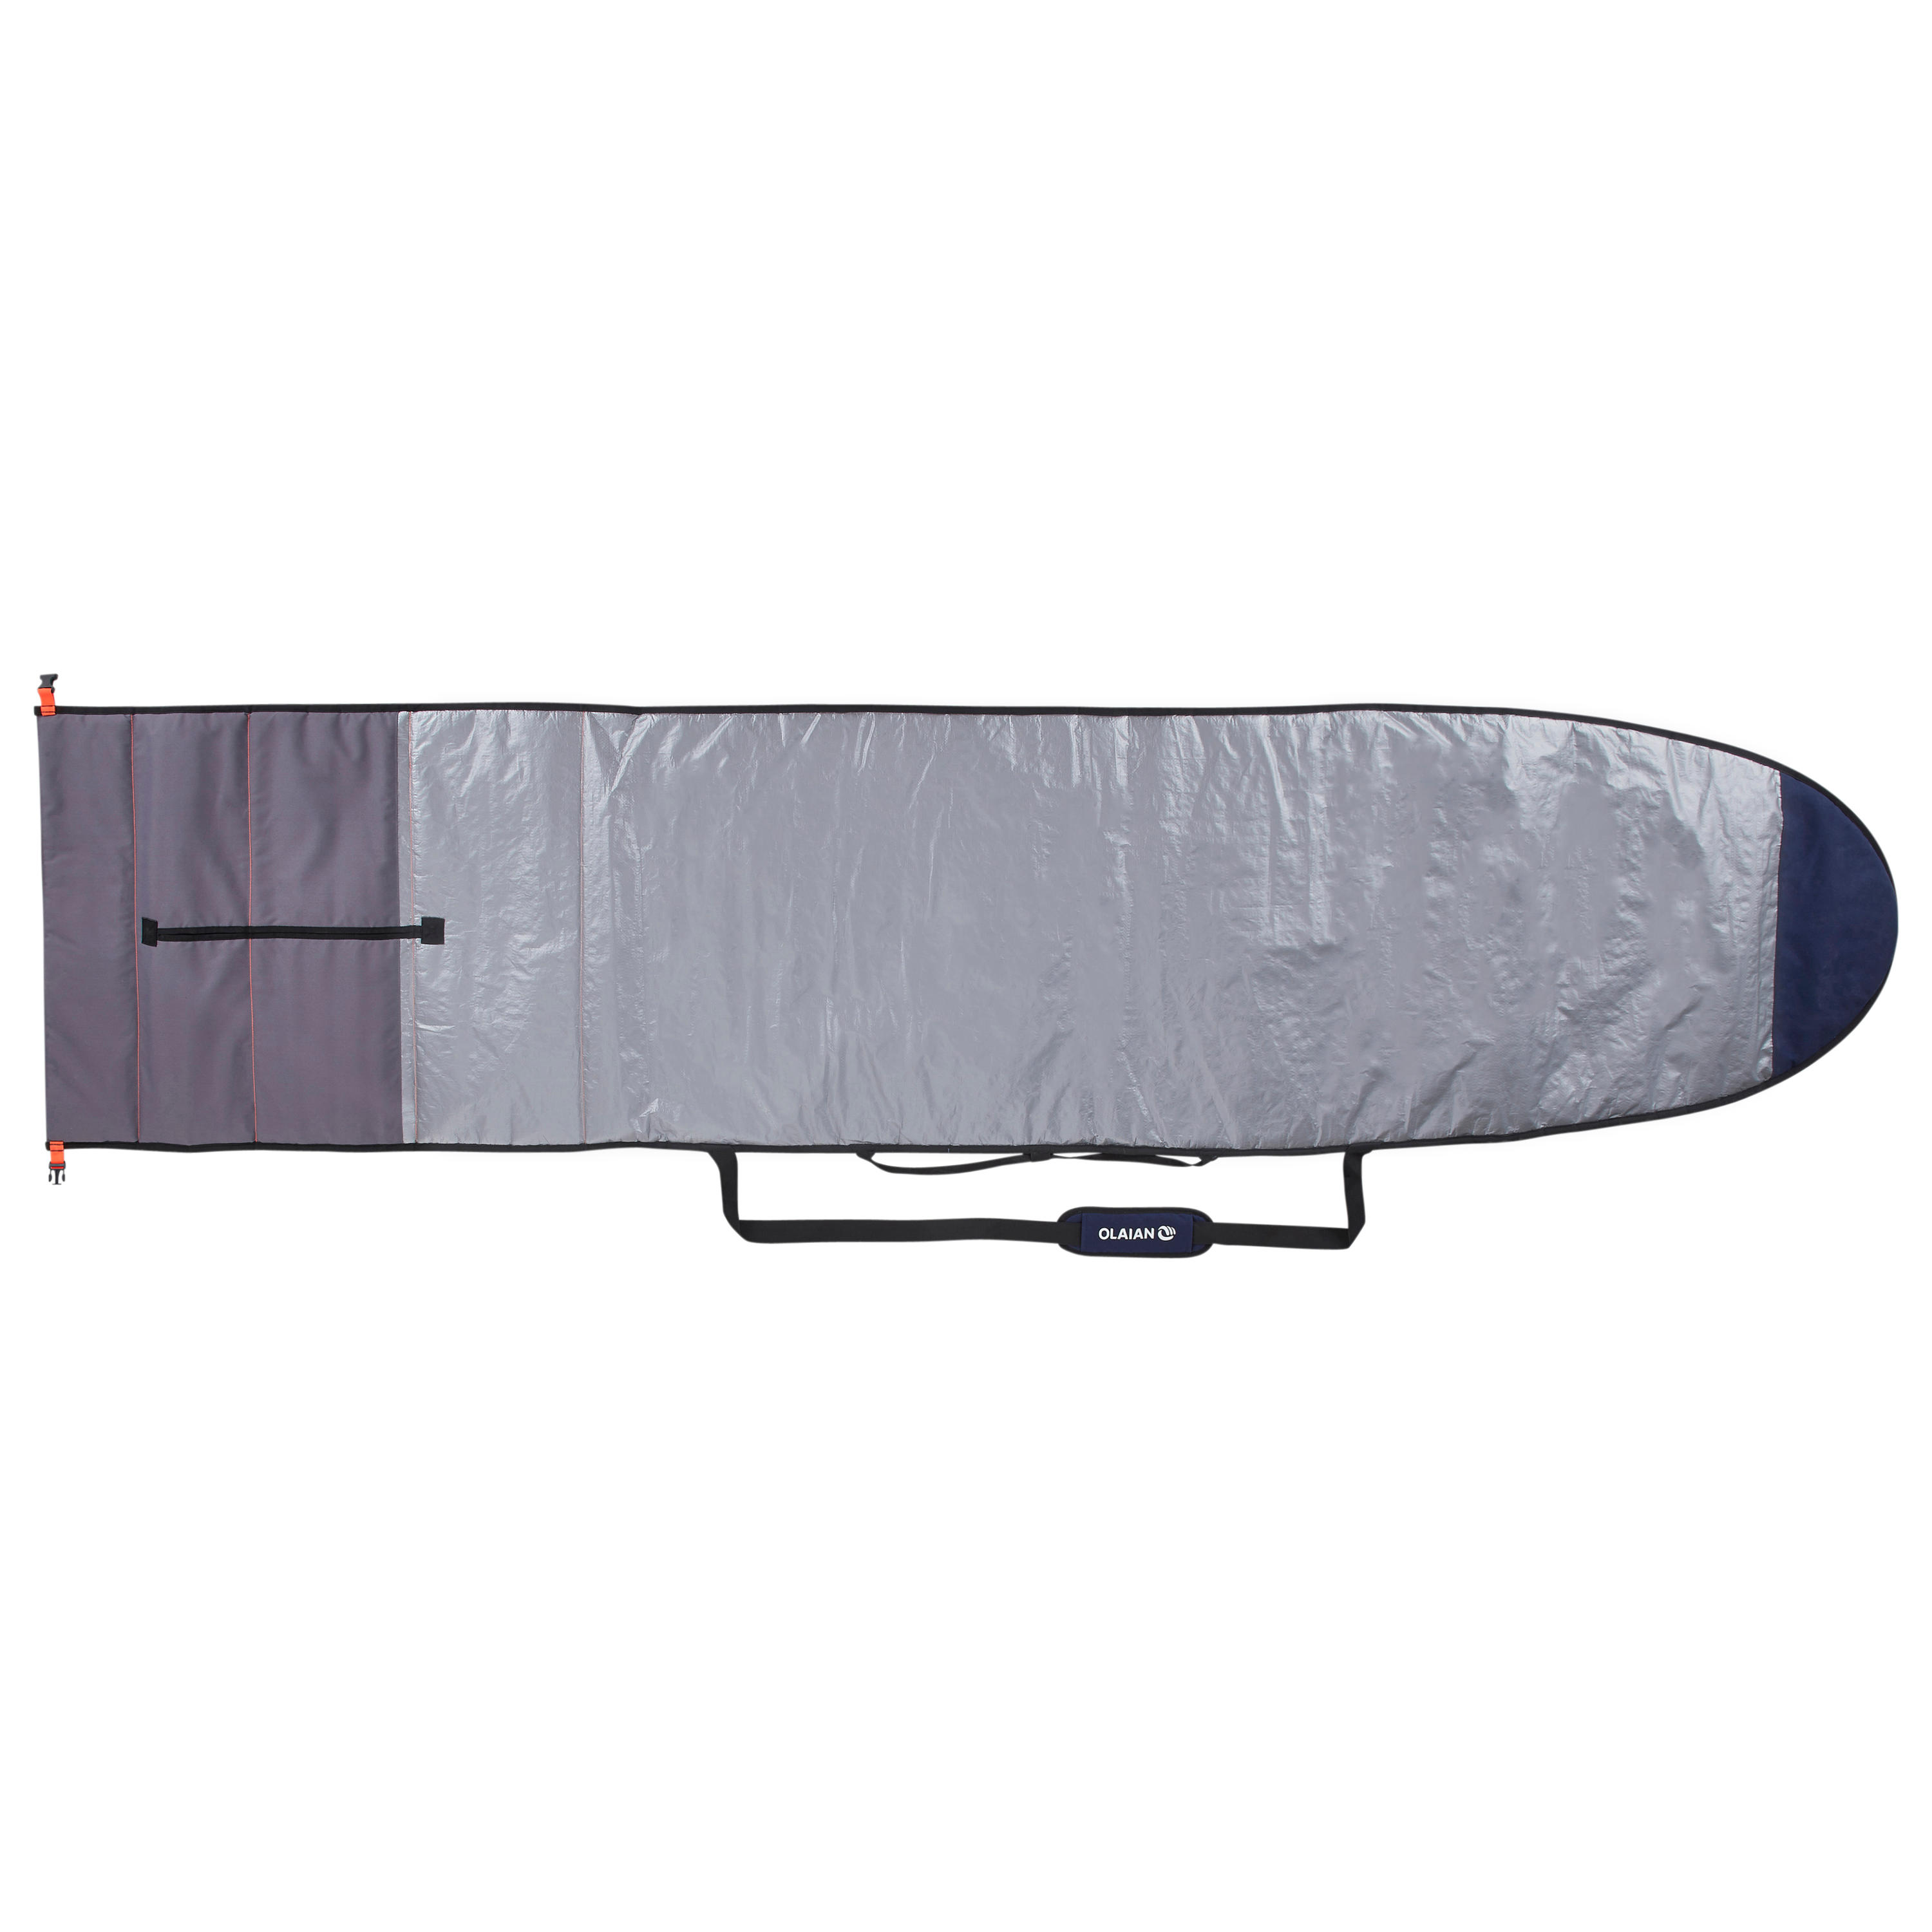 ADJUSTABLE COVER for boards 7'3 to 9'4 (221 to 285 cm) 2/8